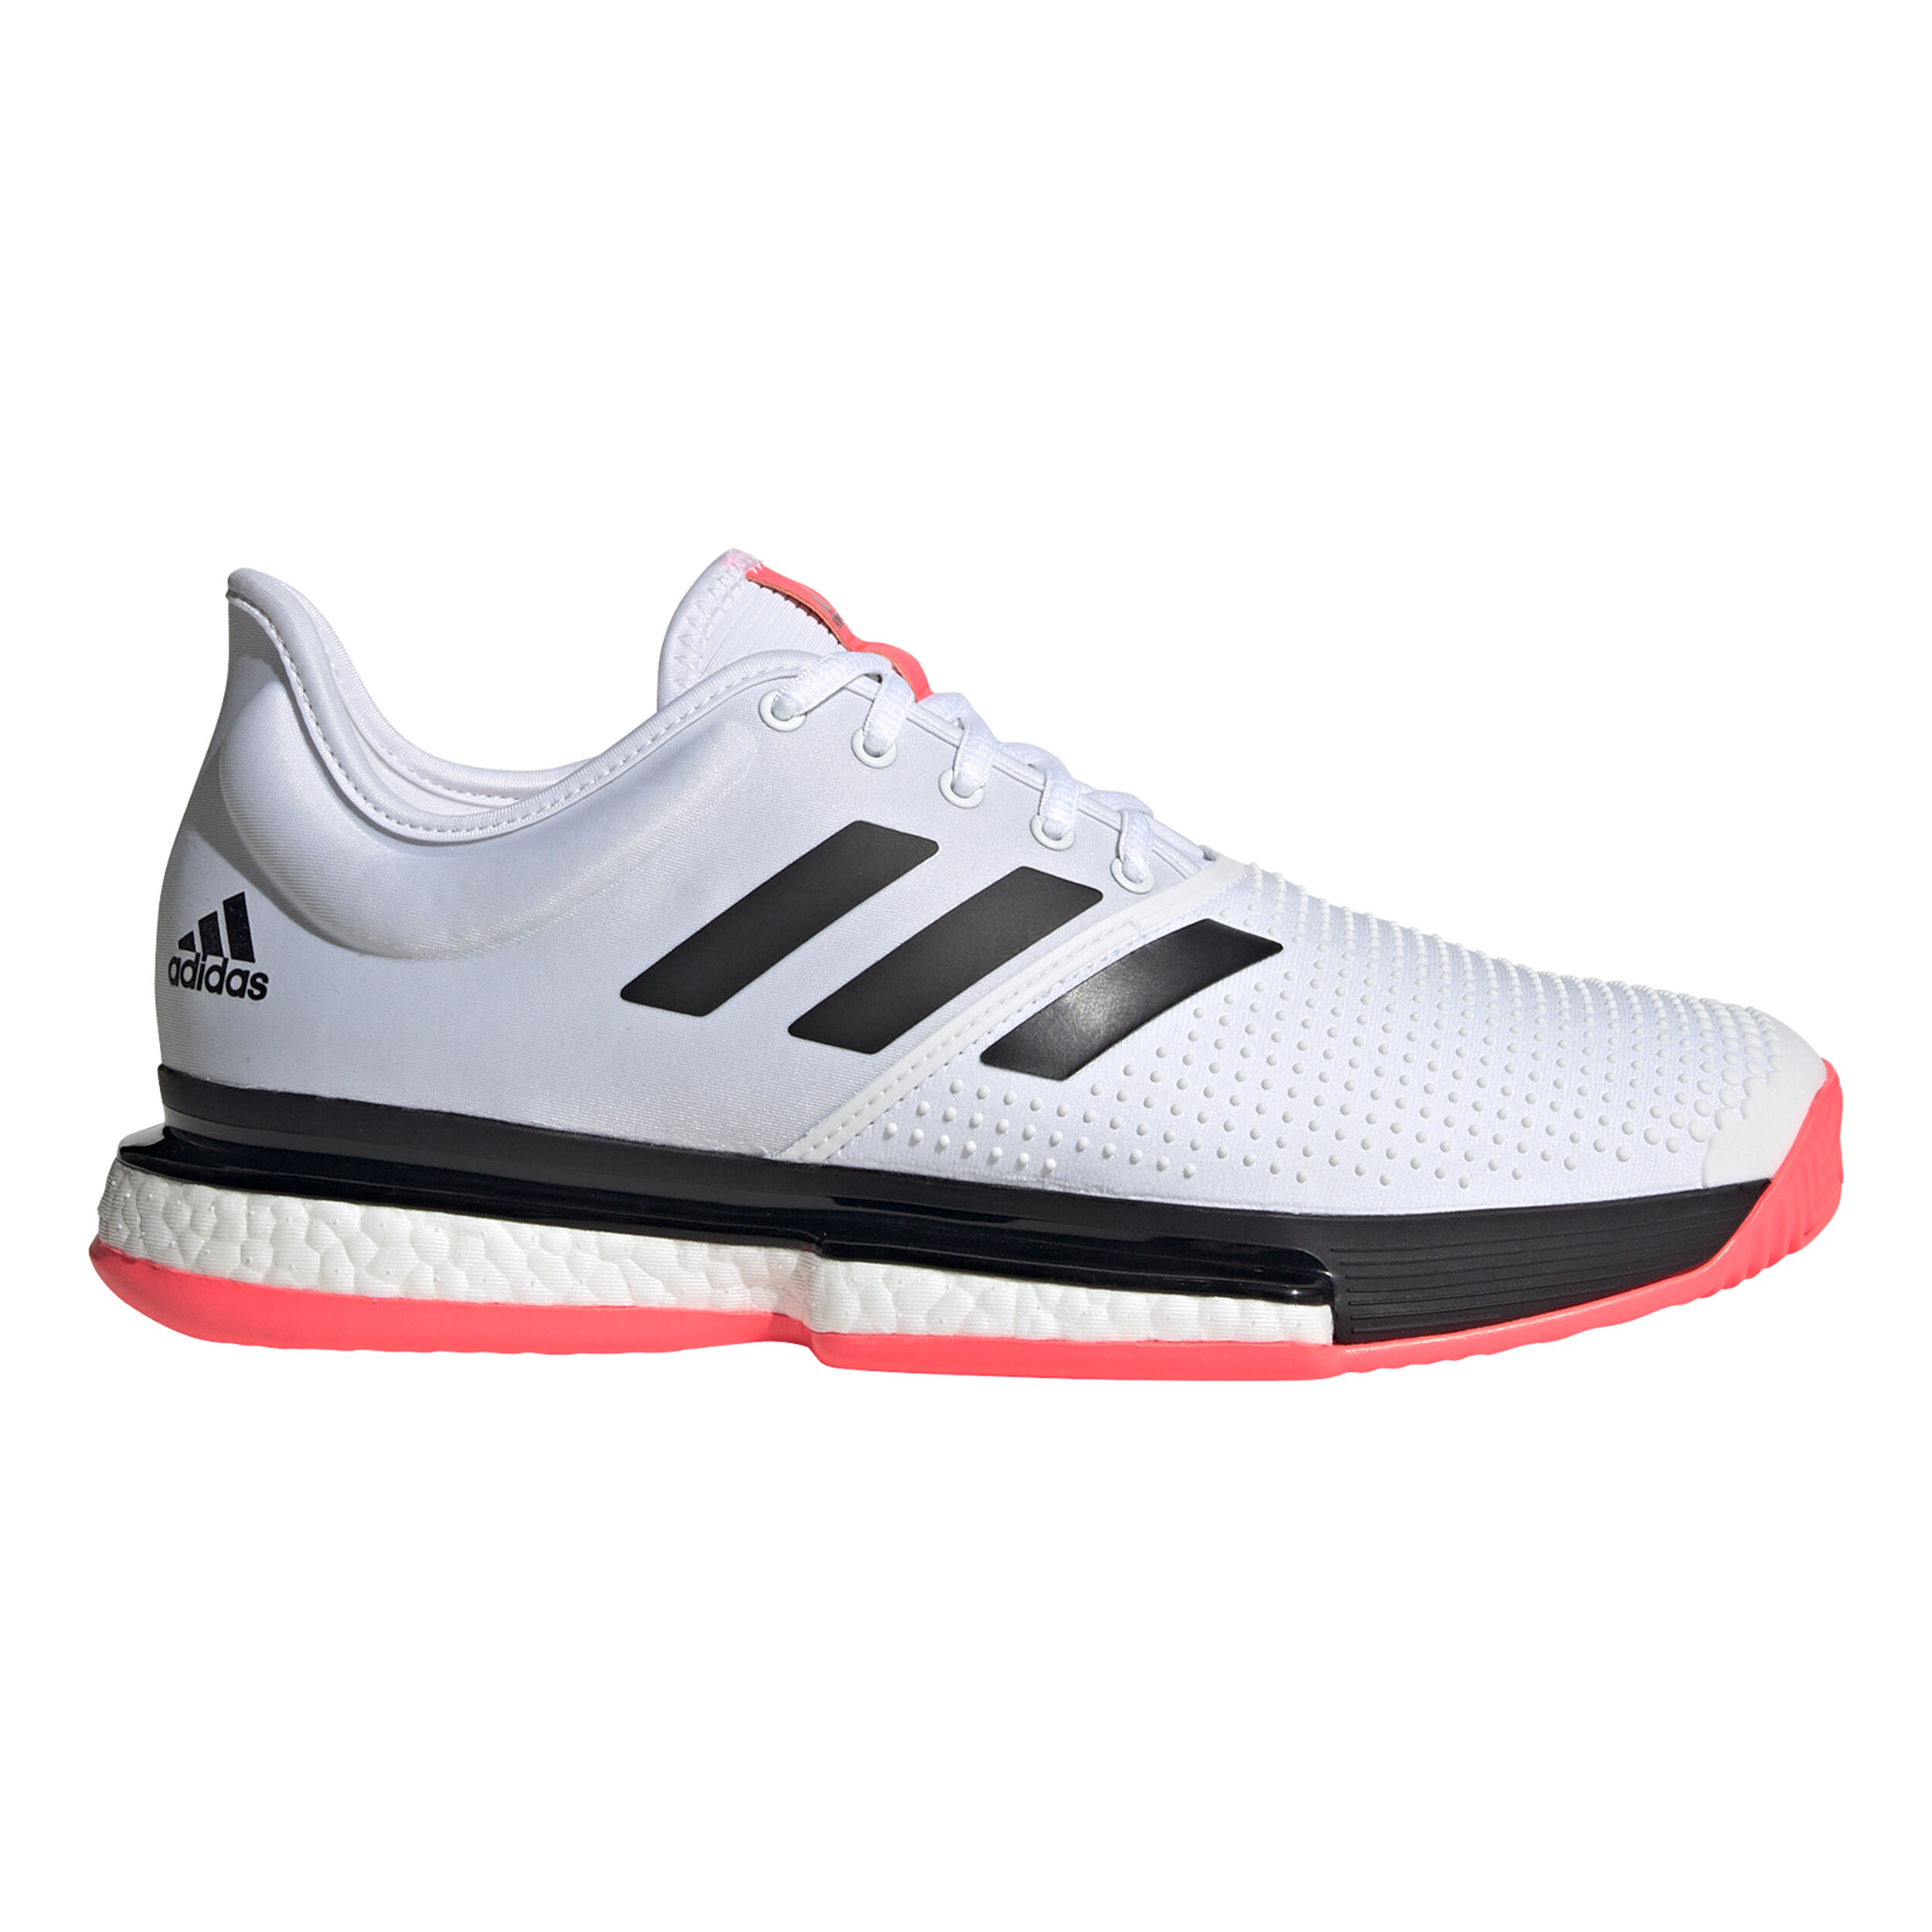 Buy Tennis shoes from adidas online | Tennis-Point